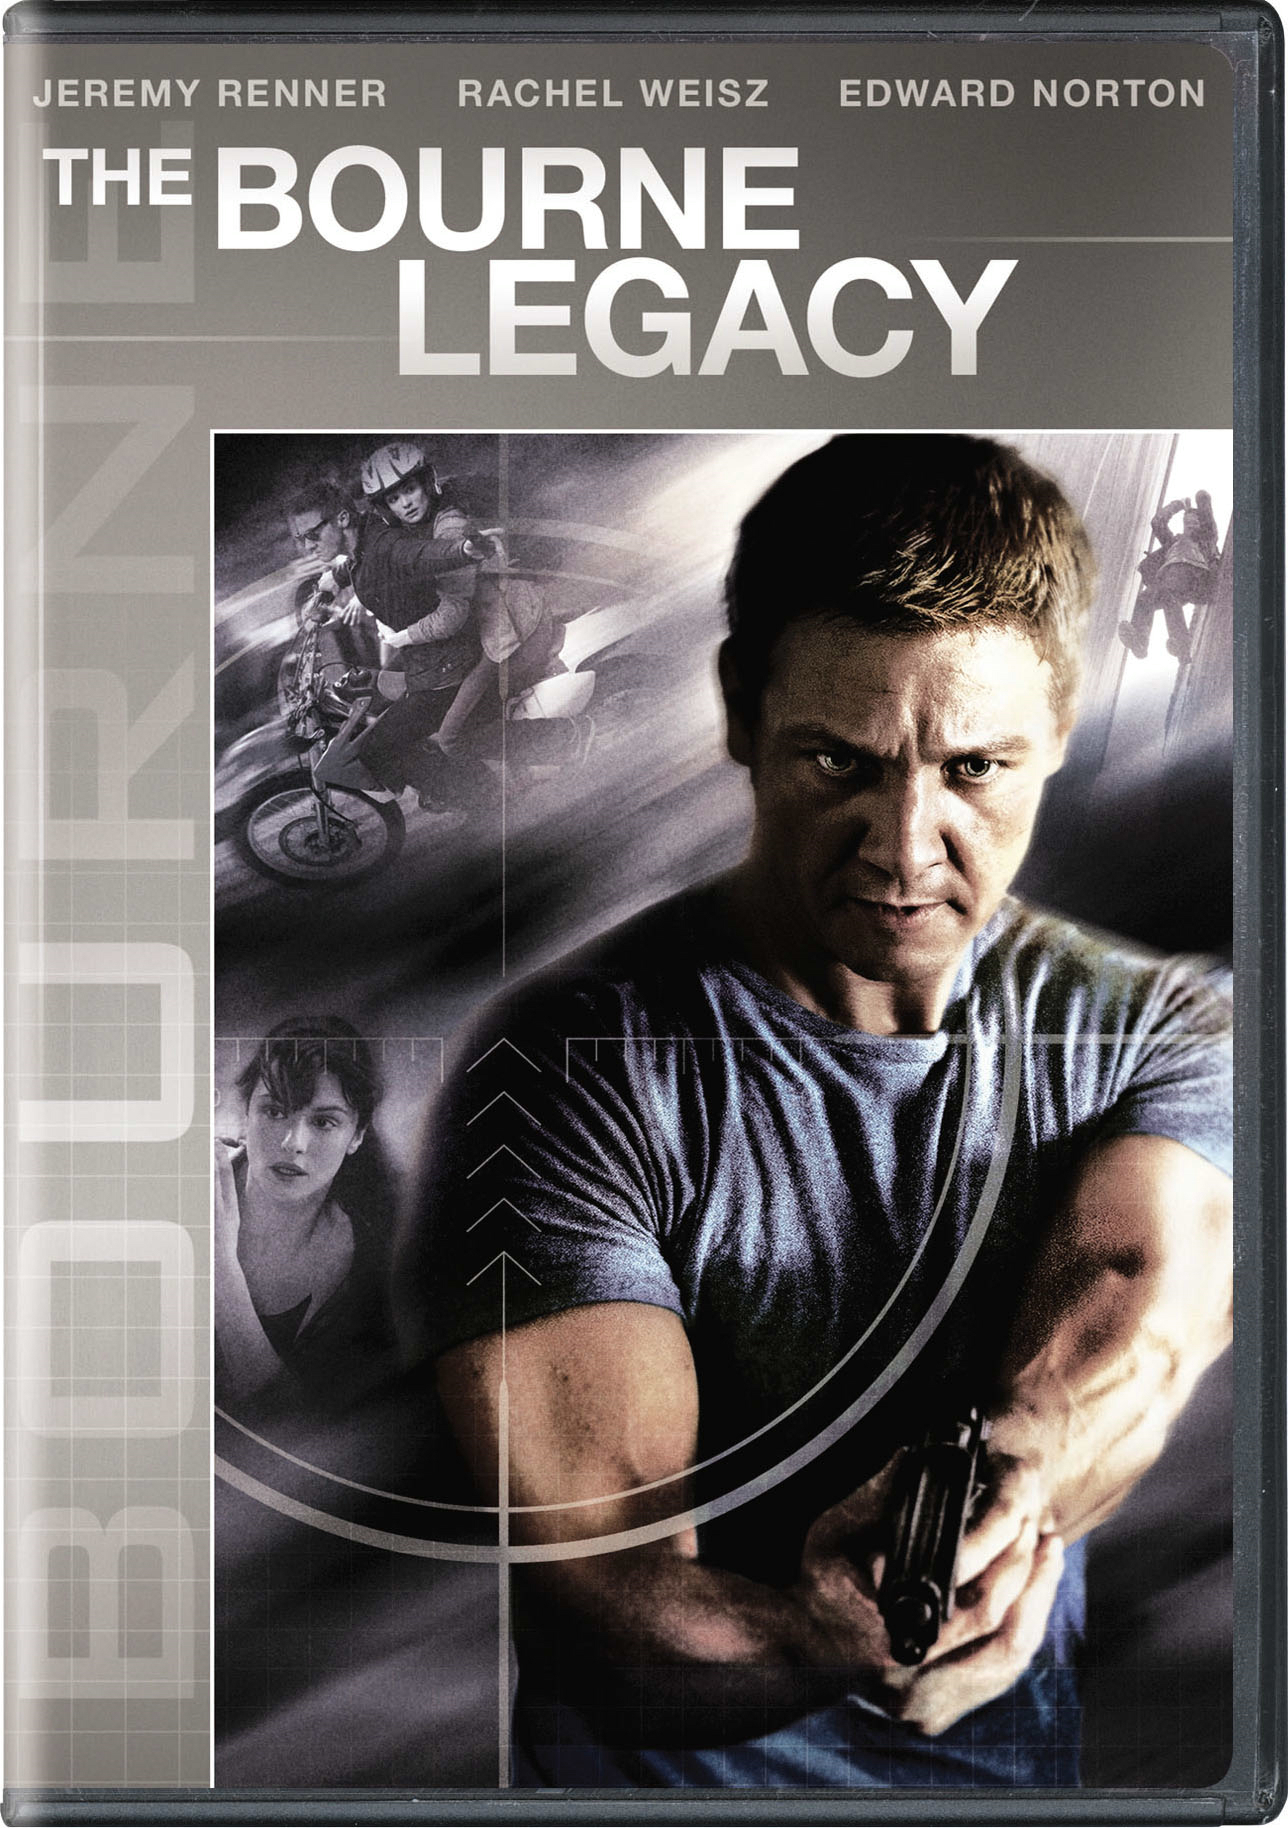 The Bourne Legacy (DVD New Box Art) - DVD [ 2012 ]  - Thriller Movies On DVD - Movies On GRUV